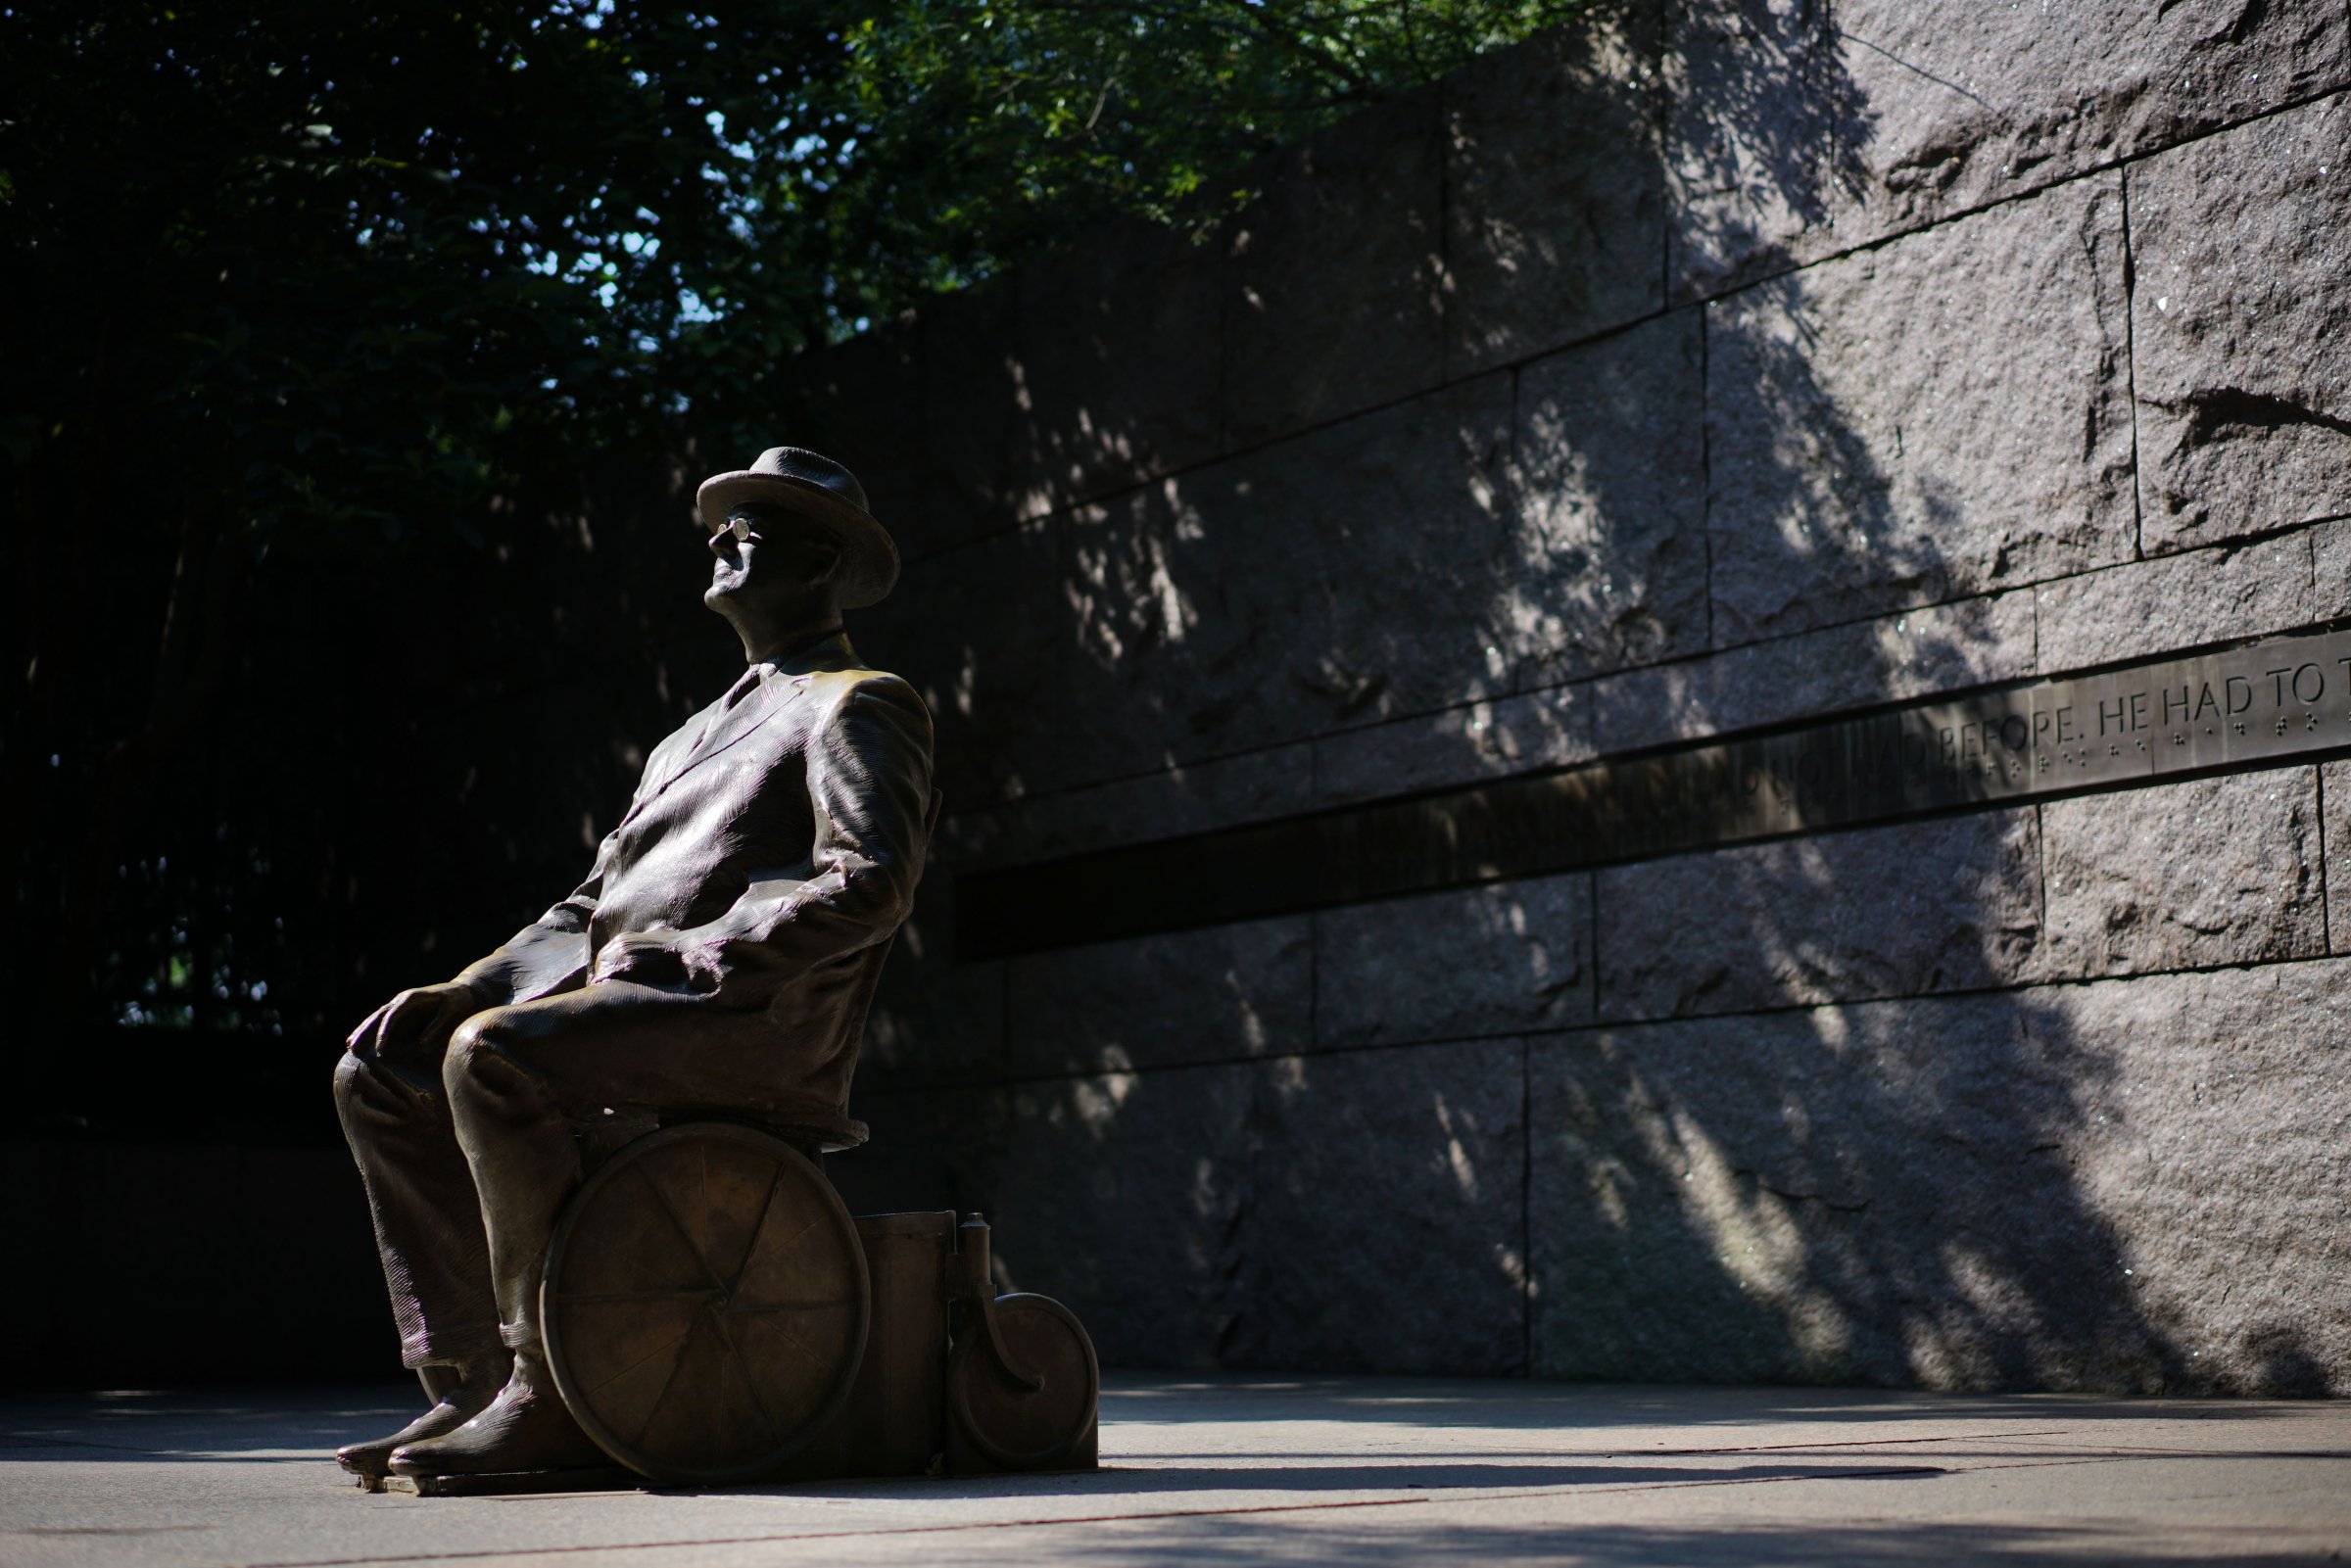 A statue of former US president Franklin Delano Roosevelt is seen at the Franklin Delano Roosevelt Memorial in Washington, D.C. on July 2, 2018.